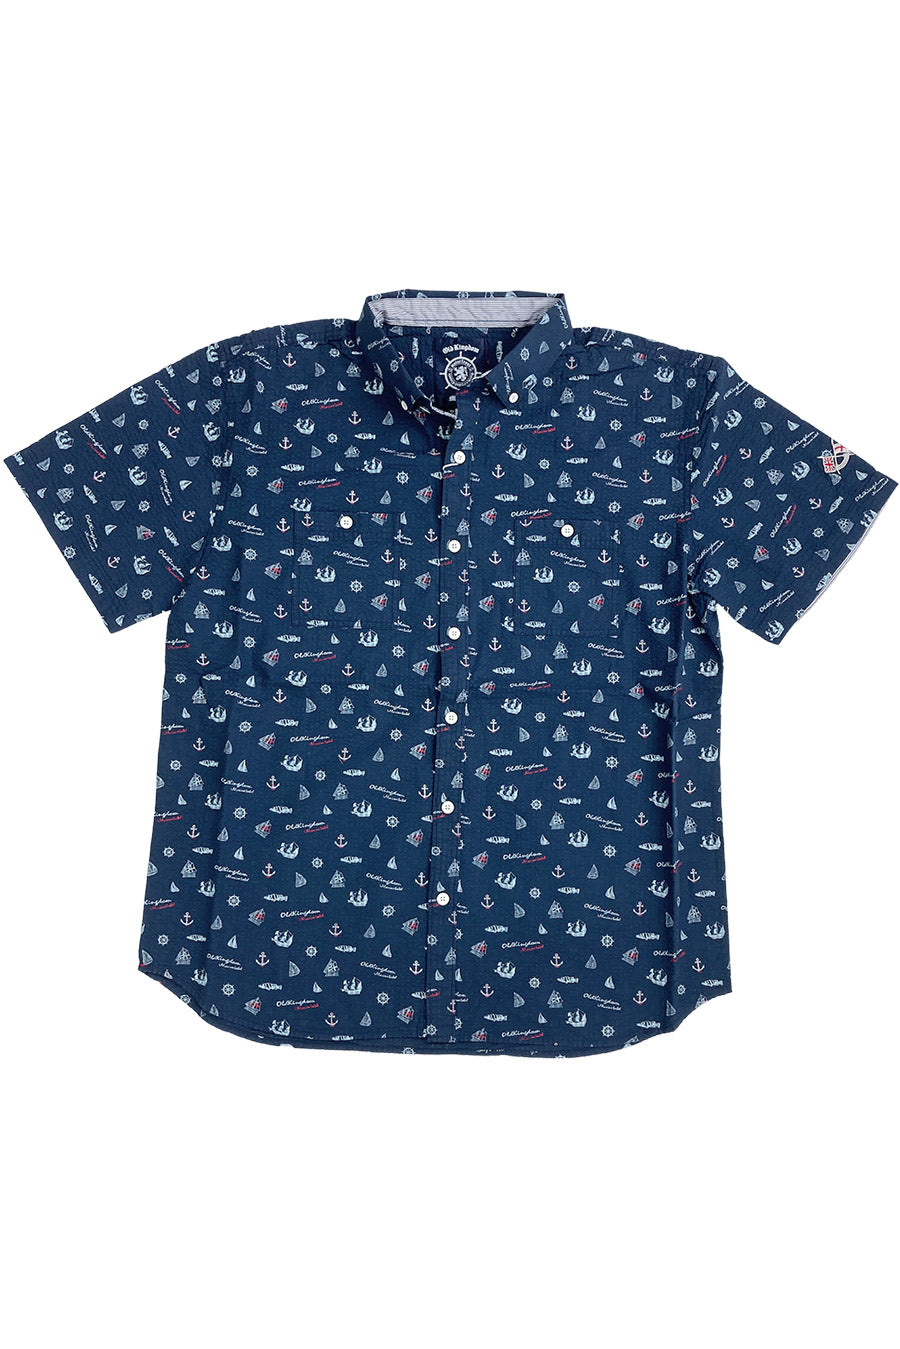 [Sale] [OUTLET] KING SIZE King Size BIG SIZE Big Size Whole Pattern Seersucker Marine Shirt Large Size Loose 2L 3L 4L 5L 6L American Casual Casual